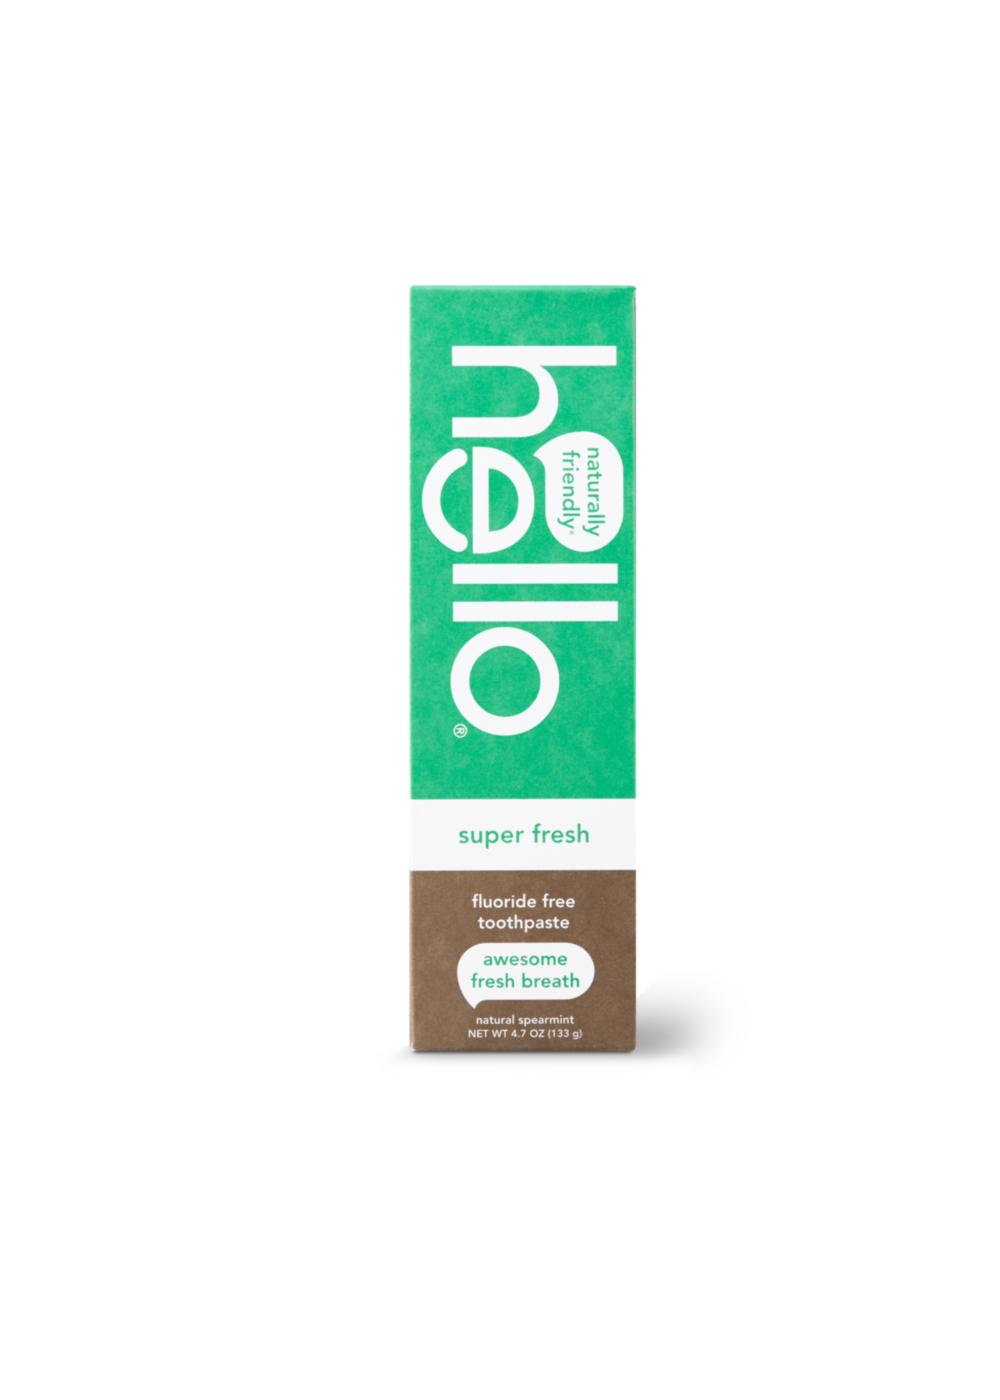 Hello Super Fresh Fluoride Free Toothpaste - Natural Spearmint; image 1 of 4